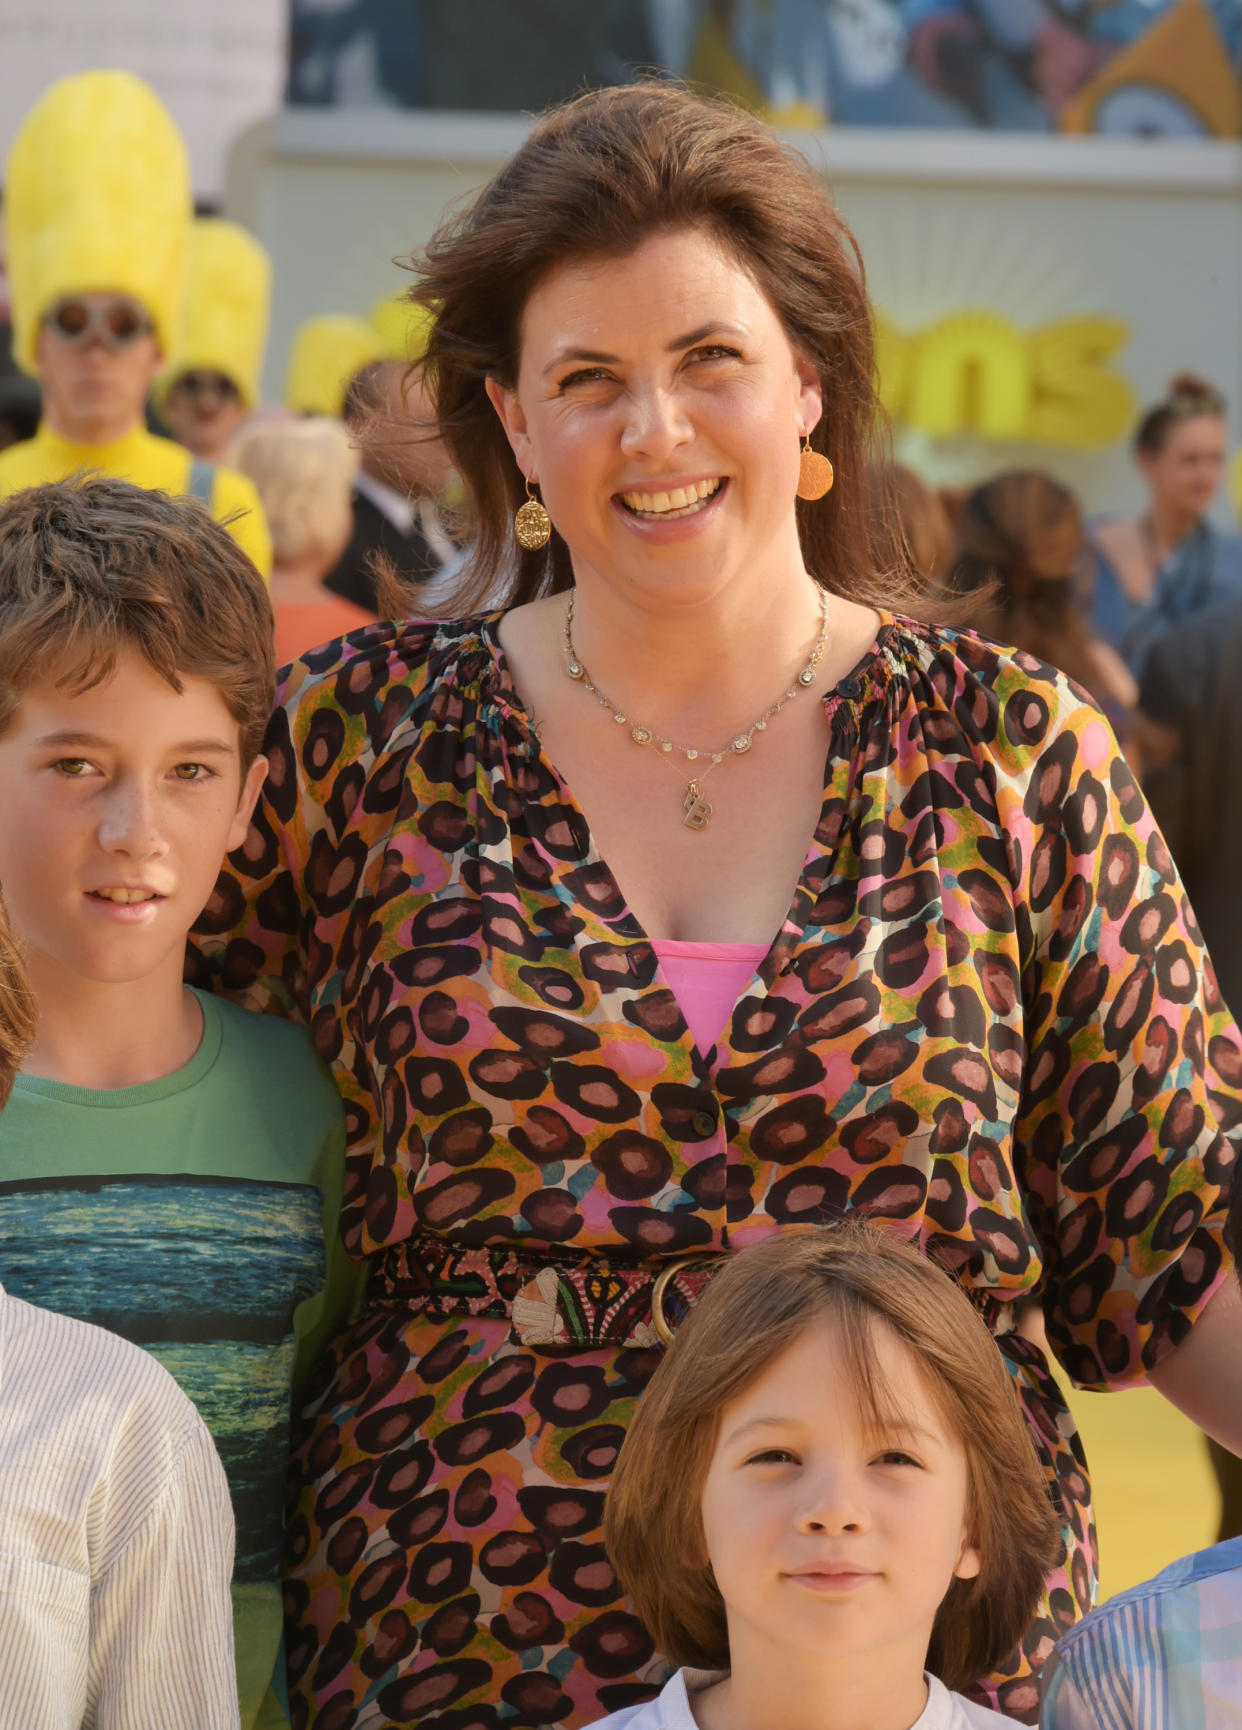 Kirstie Allsopp and her kids attend the World Premiere of Minions at Odeon Leicester Square. (Getty)